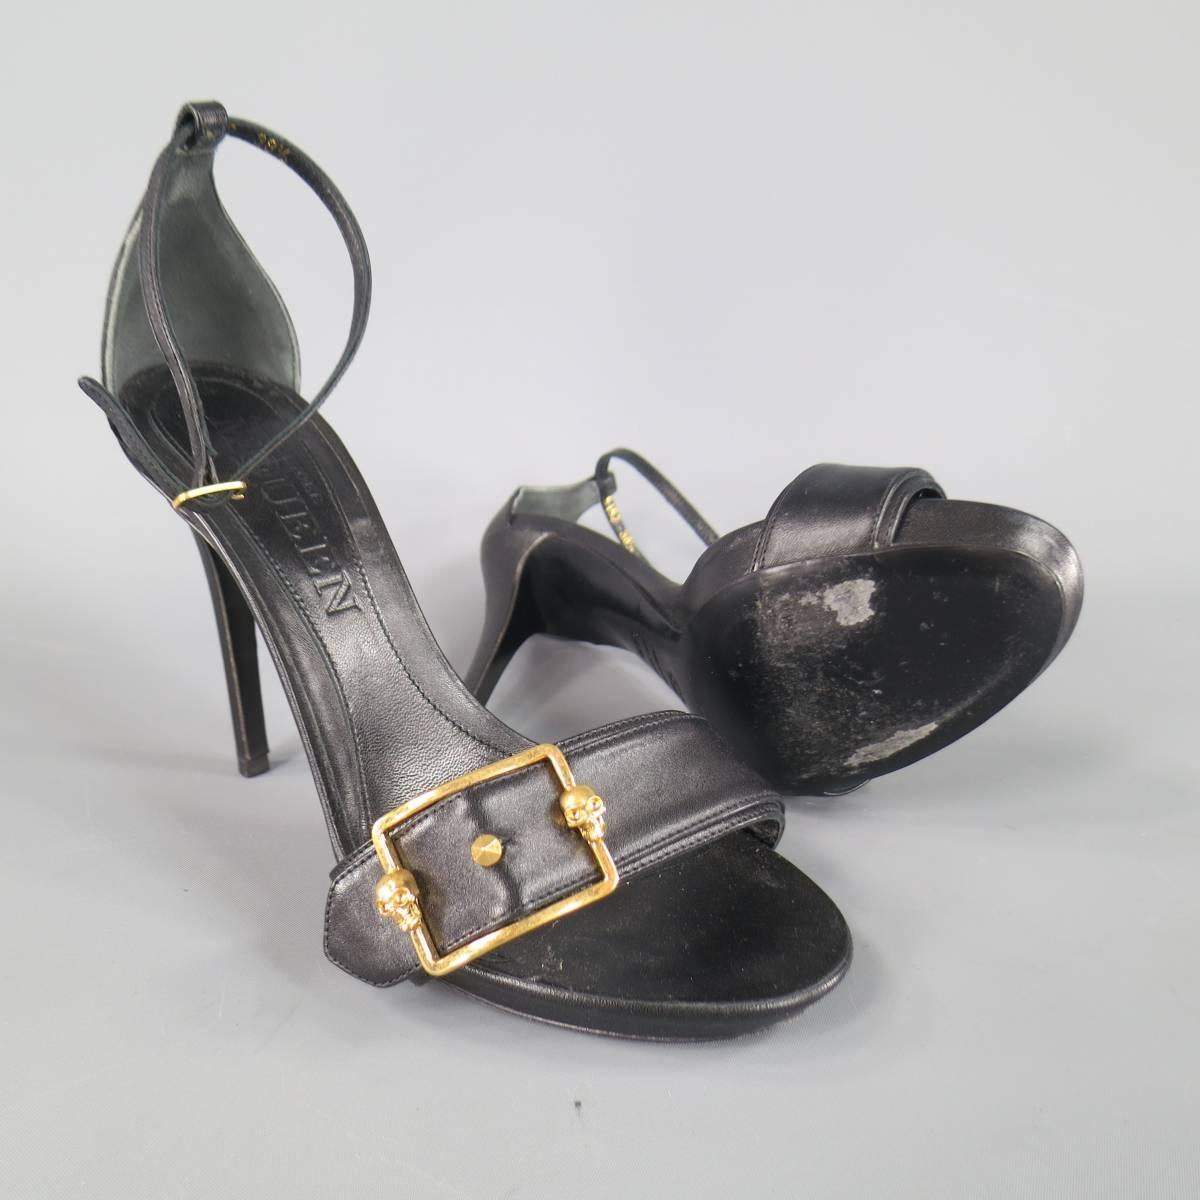 Women's ALEXANDER MCQUEEN Size 8.5 Black Leather Gold Skull Buckle Ankle Strap Sandals